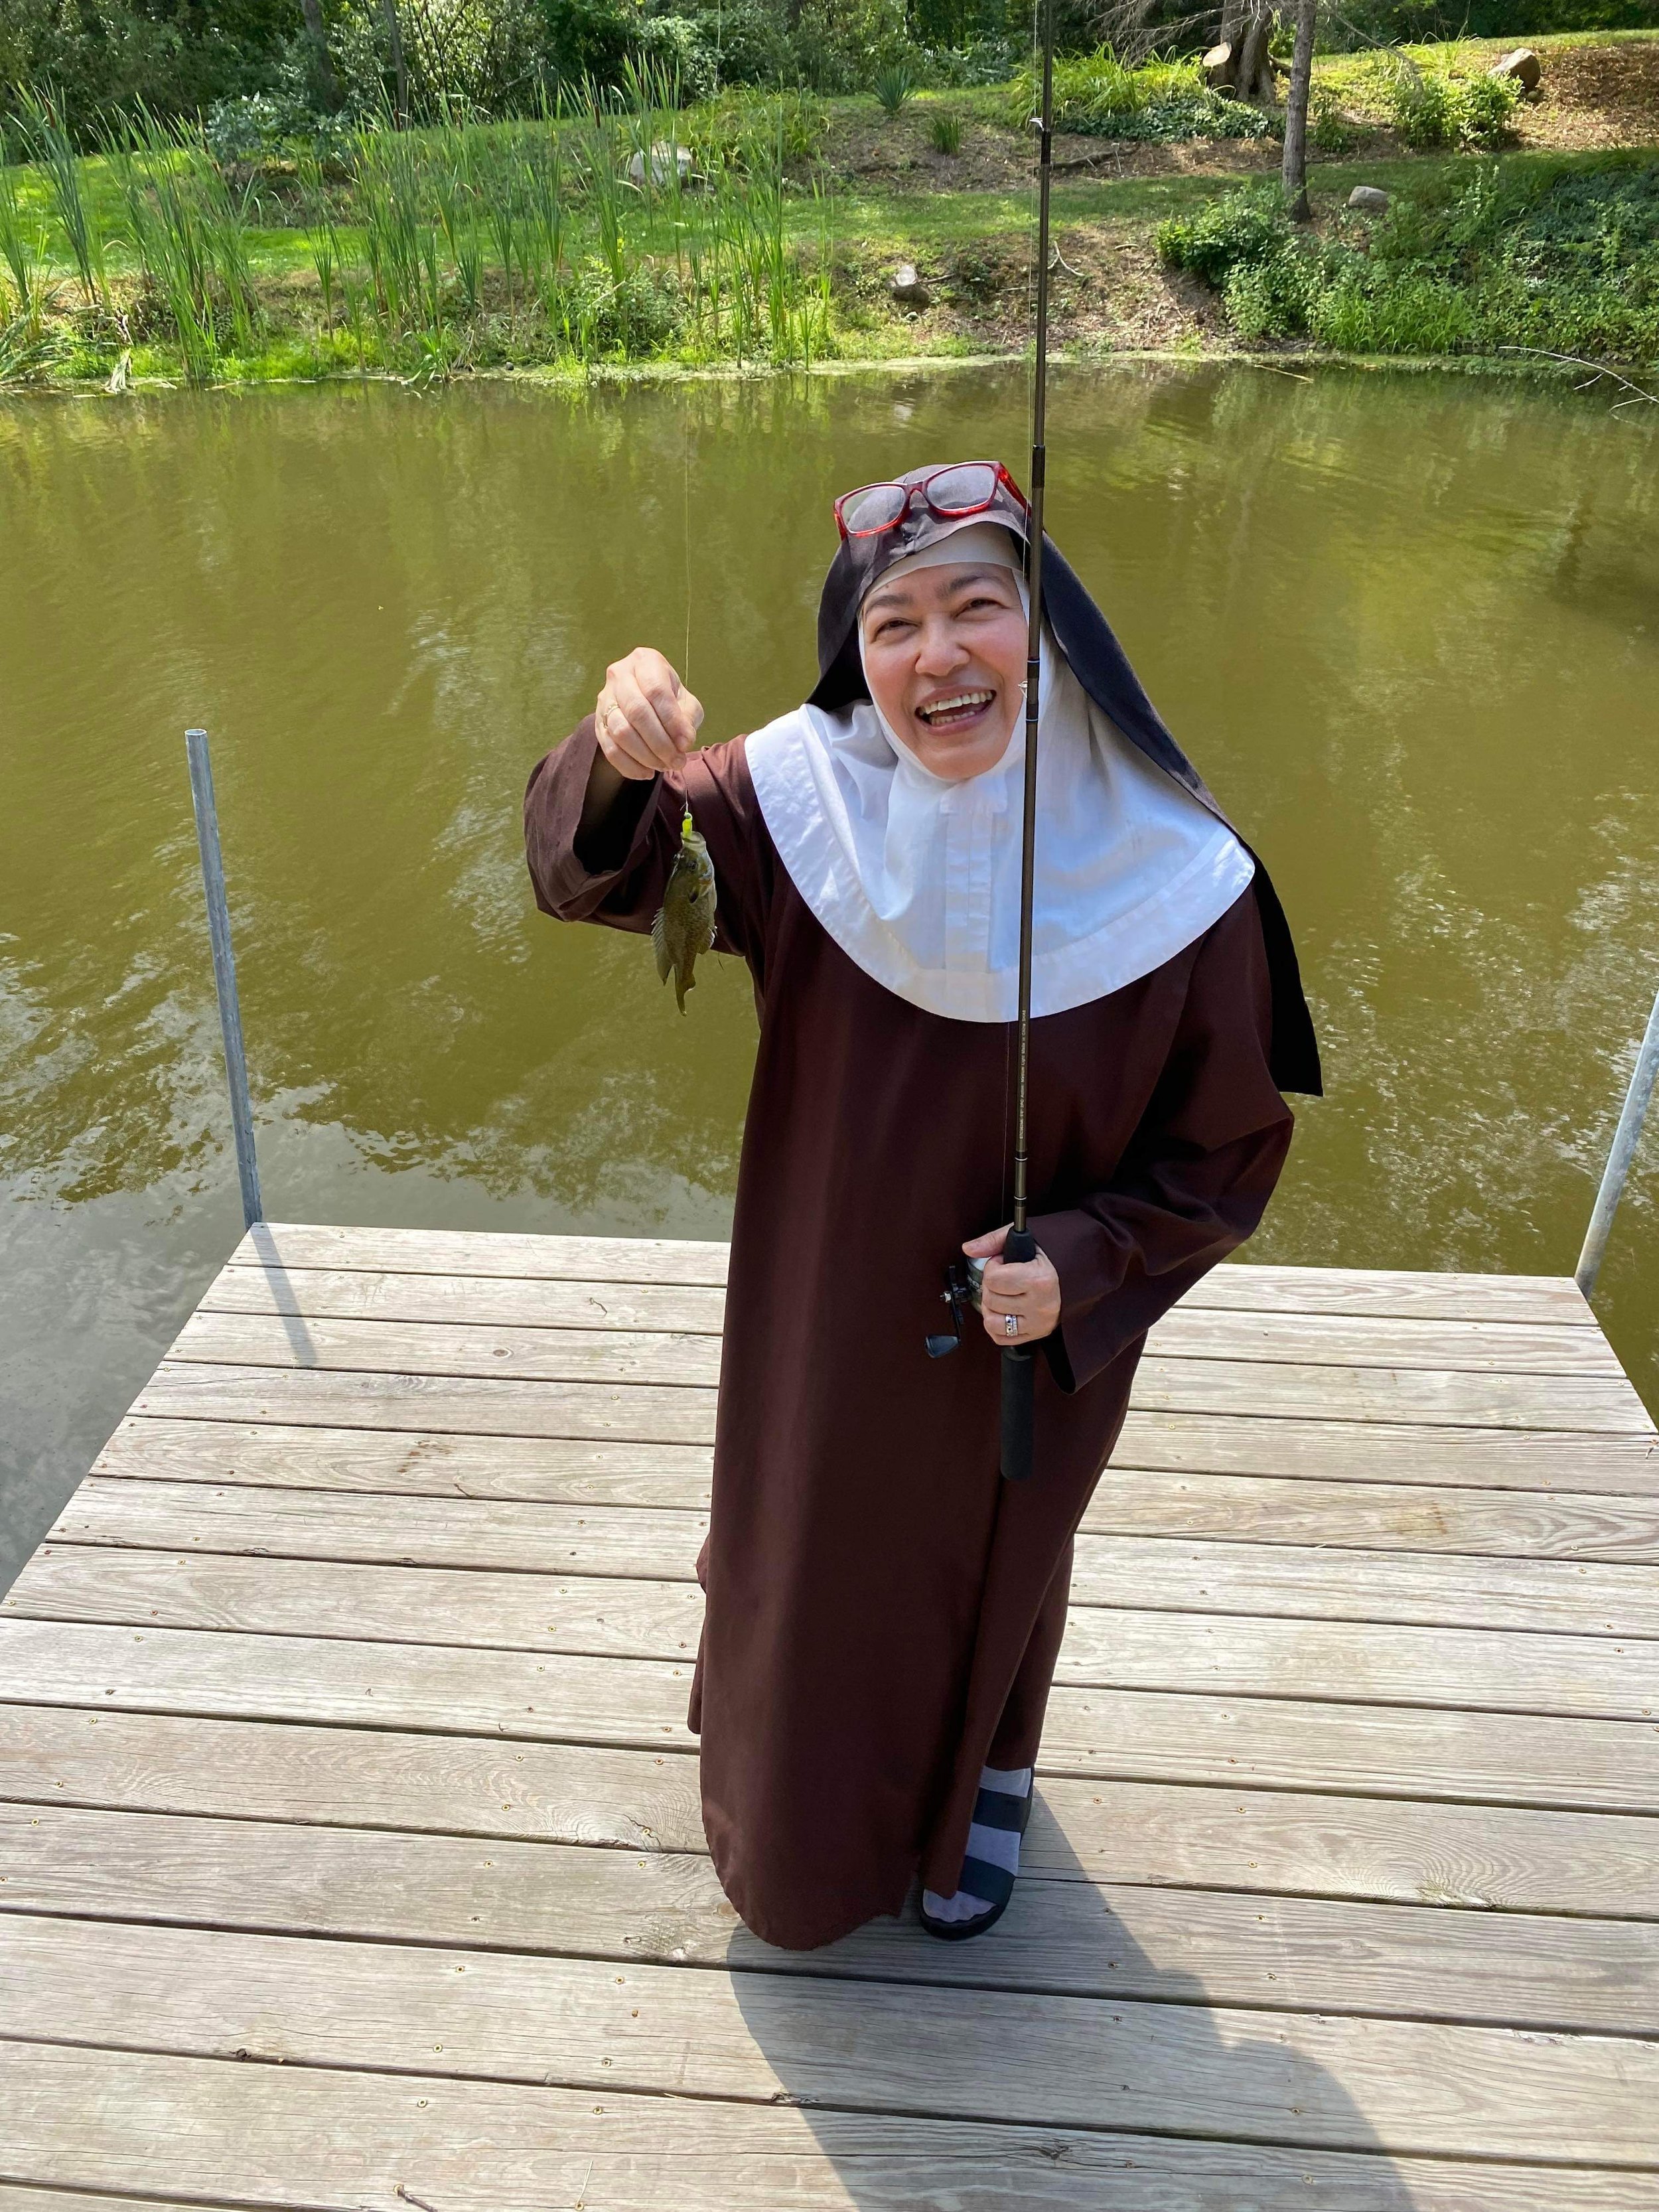 The infamous fish that Sr. Maria Teresina was so delighted to catch...only after this did we have the heart to tell her no fishing in our pond